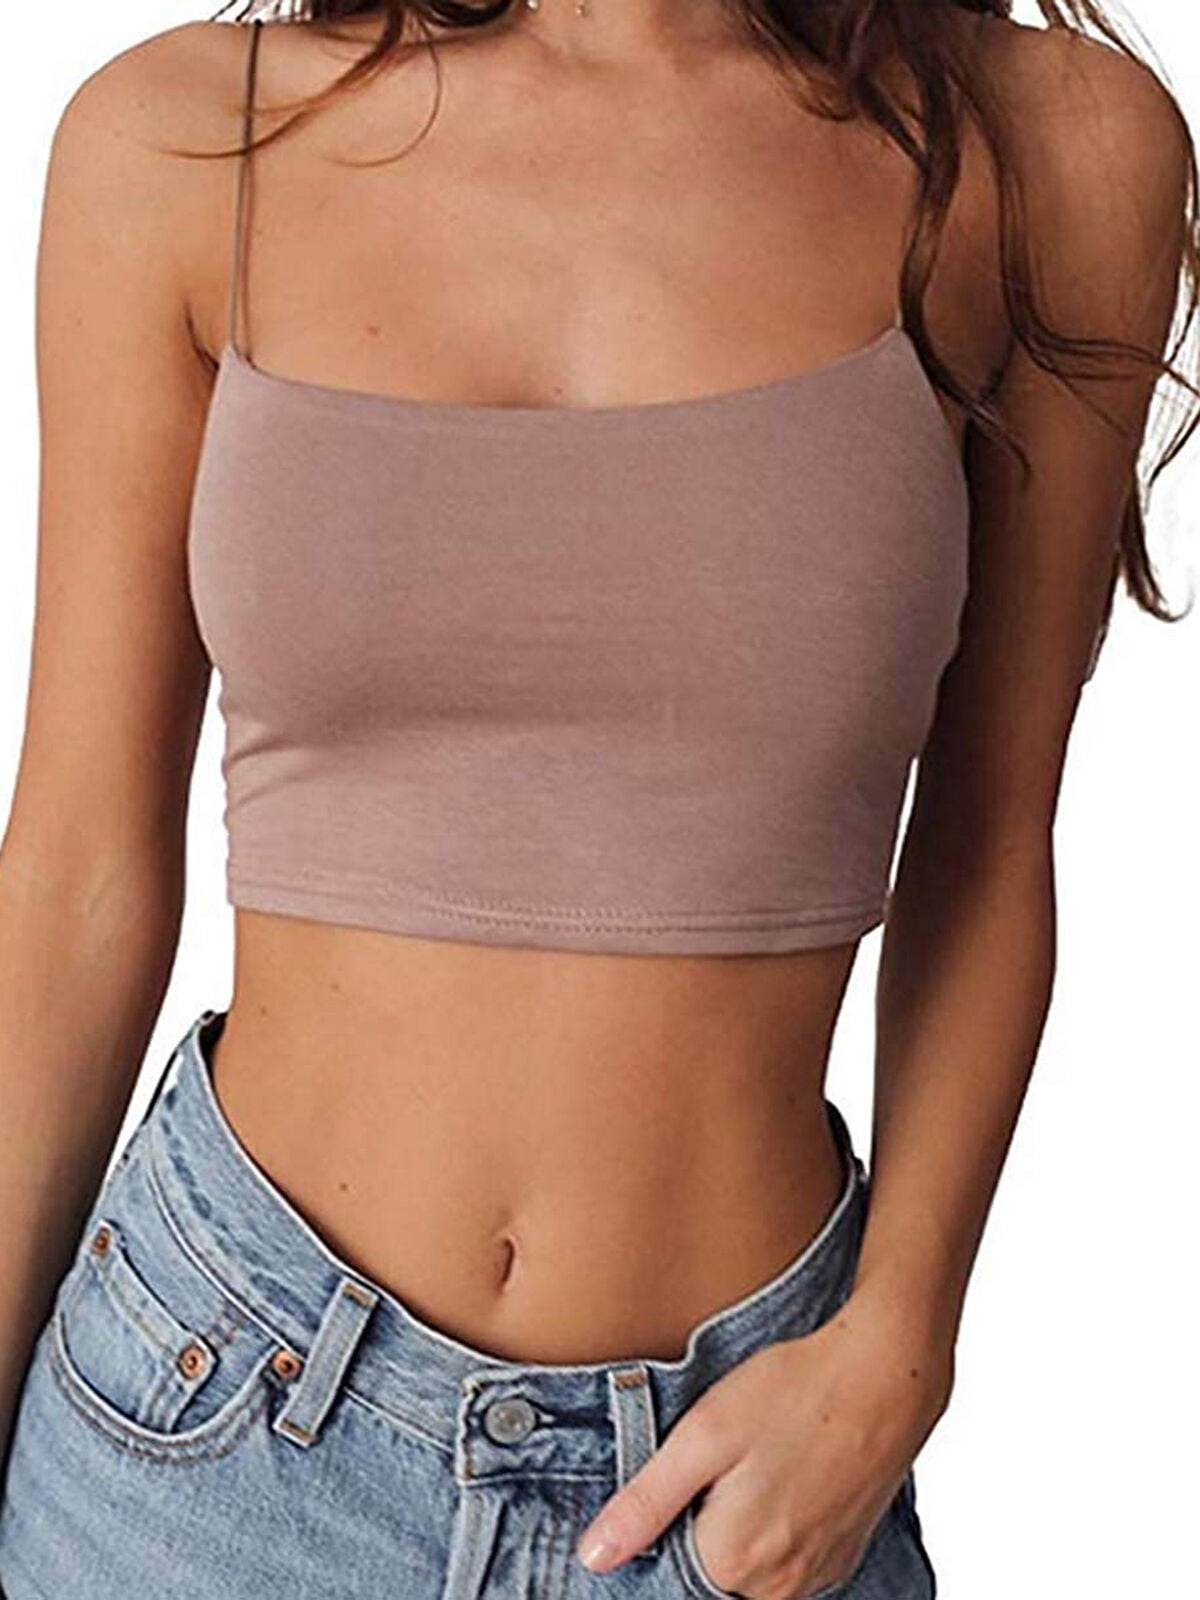 Summer Fashion Sleeveless Off Shoulder Casual Shirts Camis Vest Crop Tank Tops Tees Blouses Kekebest Women 